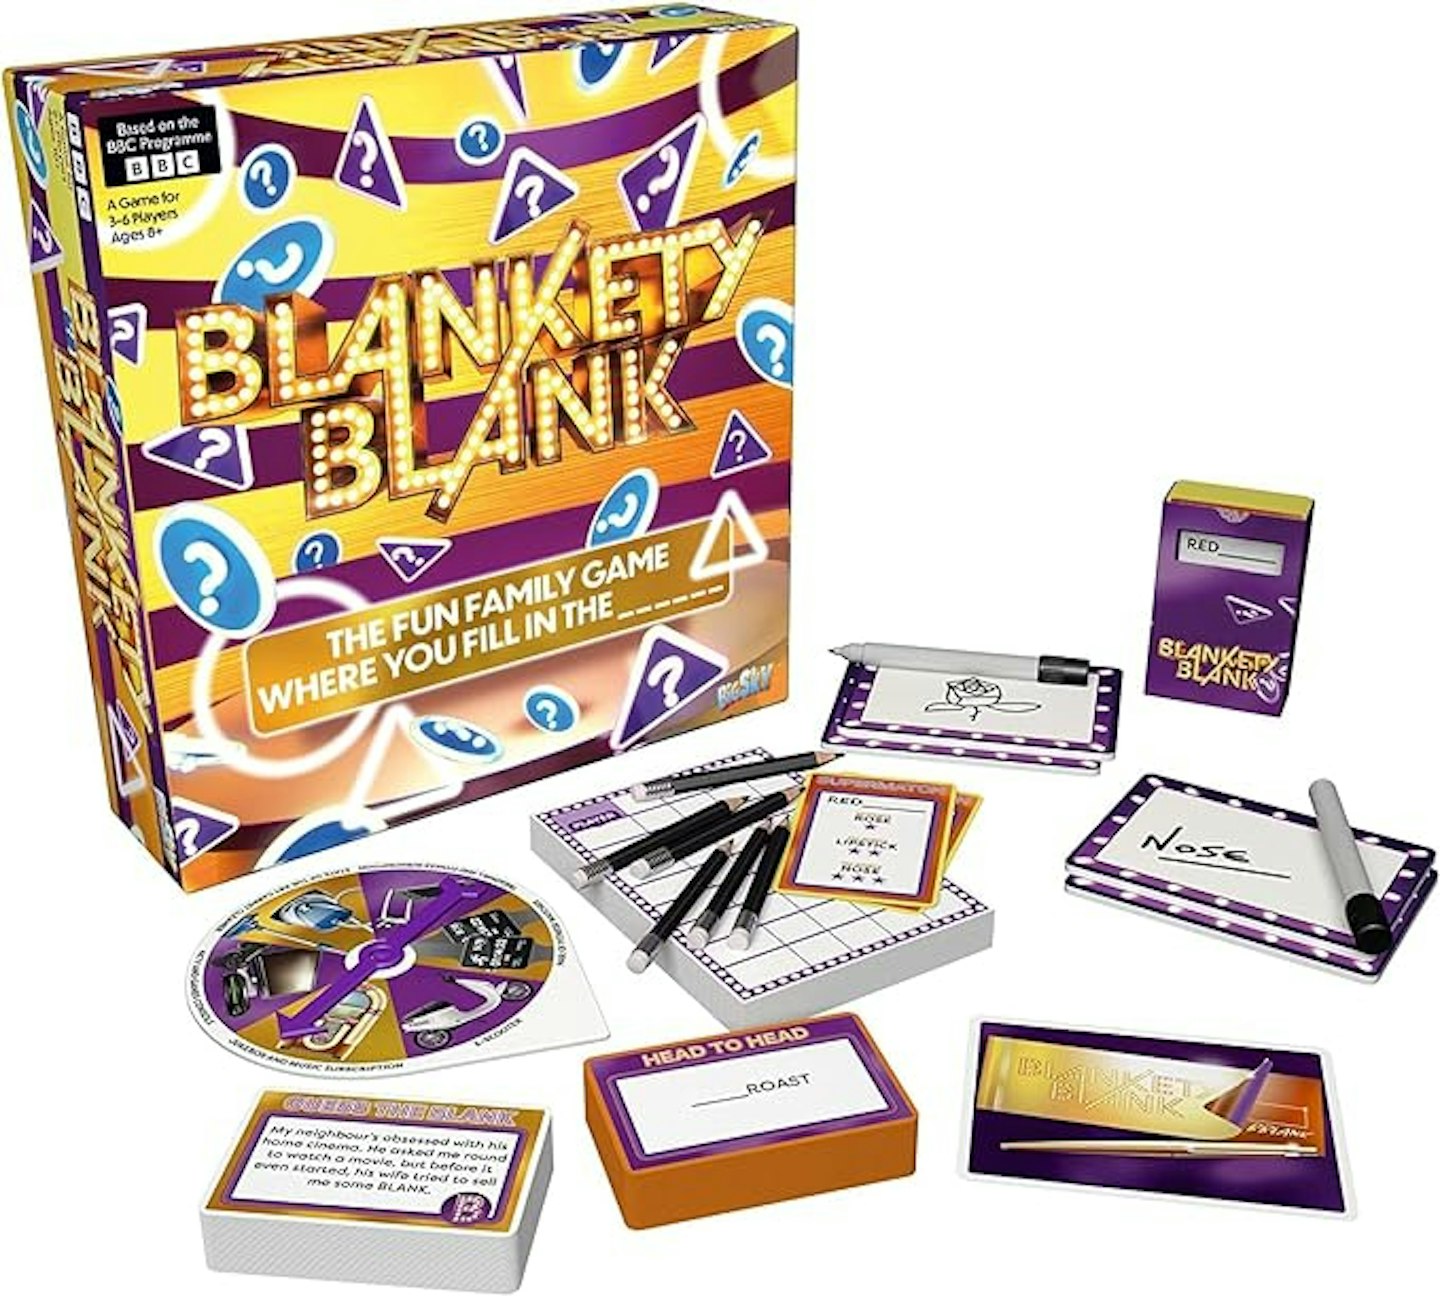 Blankety Blank board game box and contents